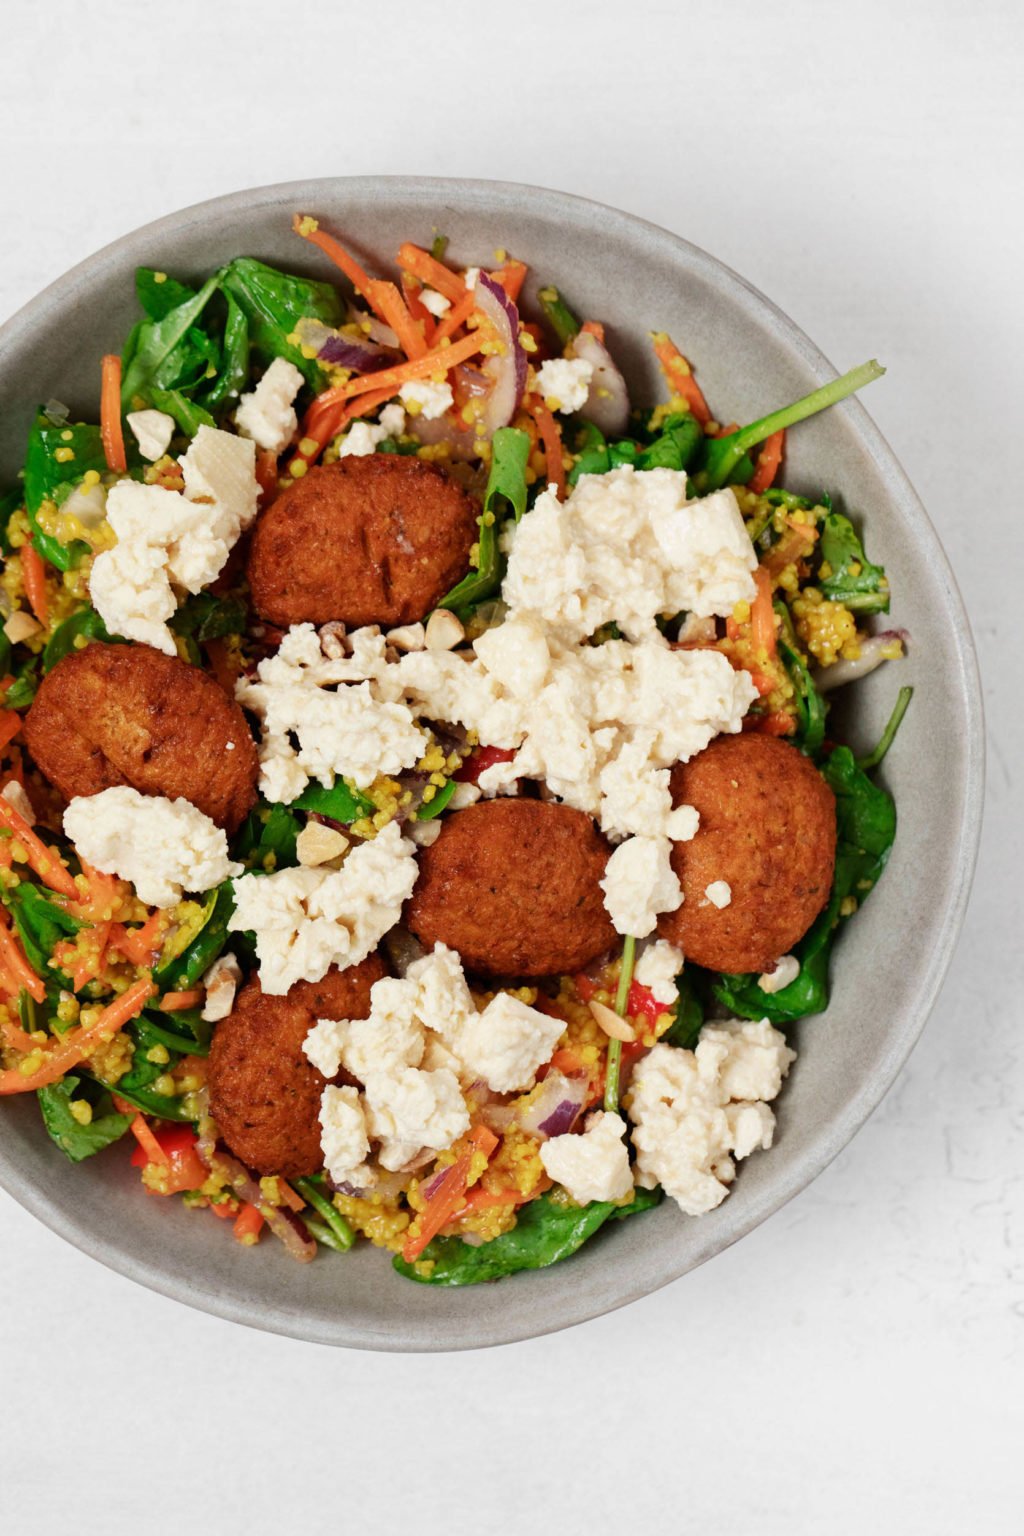 Falafel, greens, and vegan feta cheese are piled into a round serving bowl.